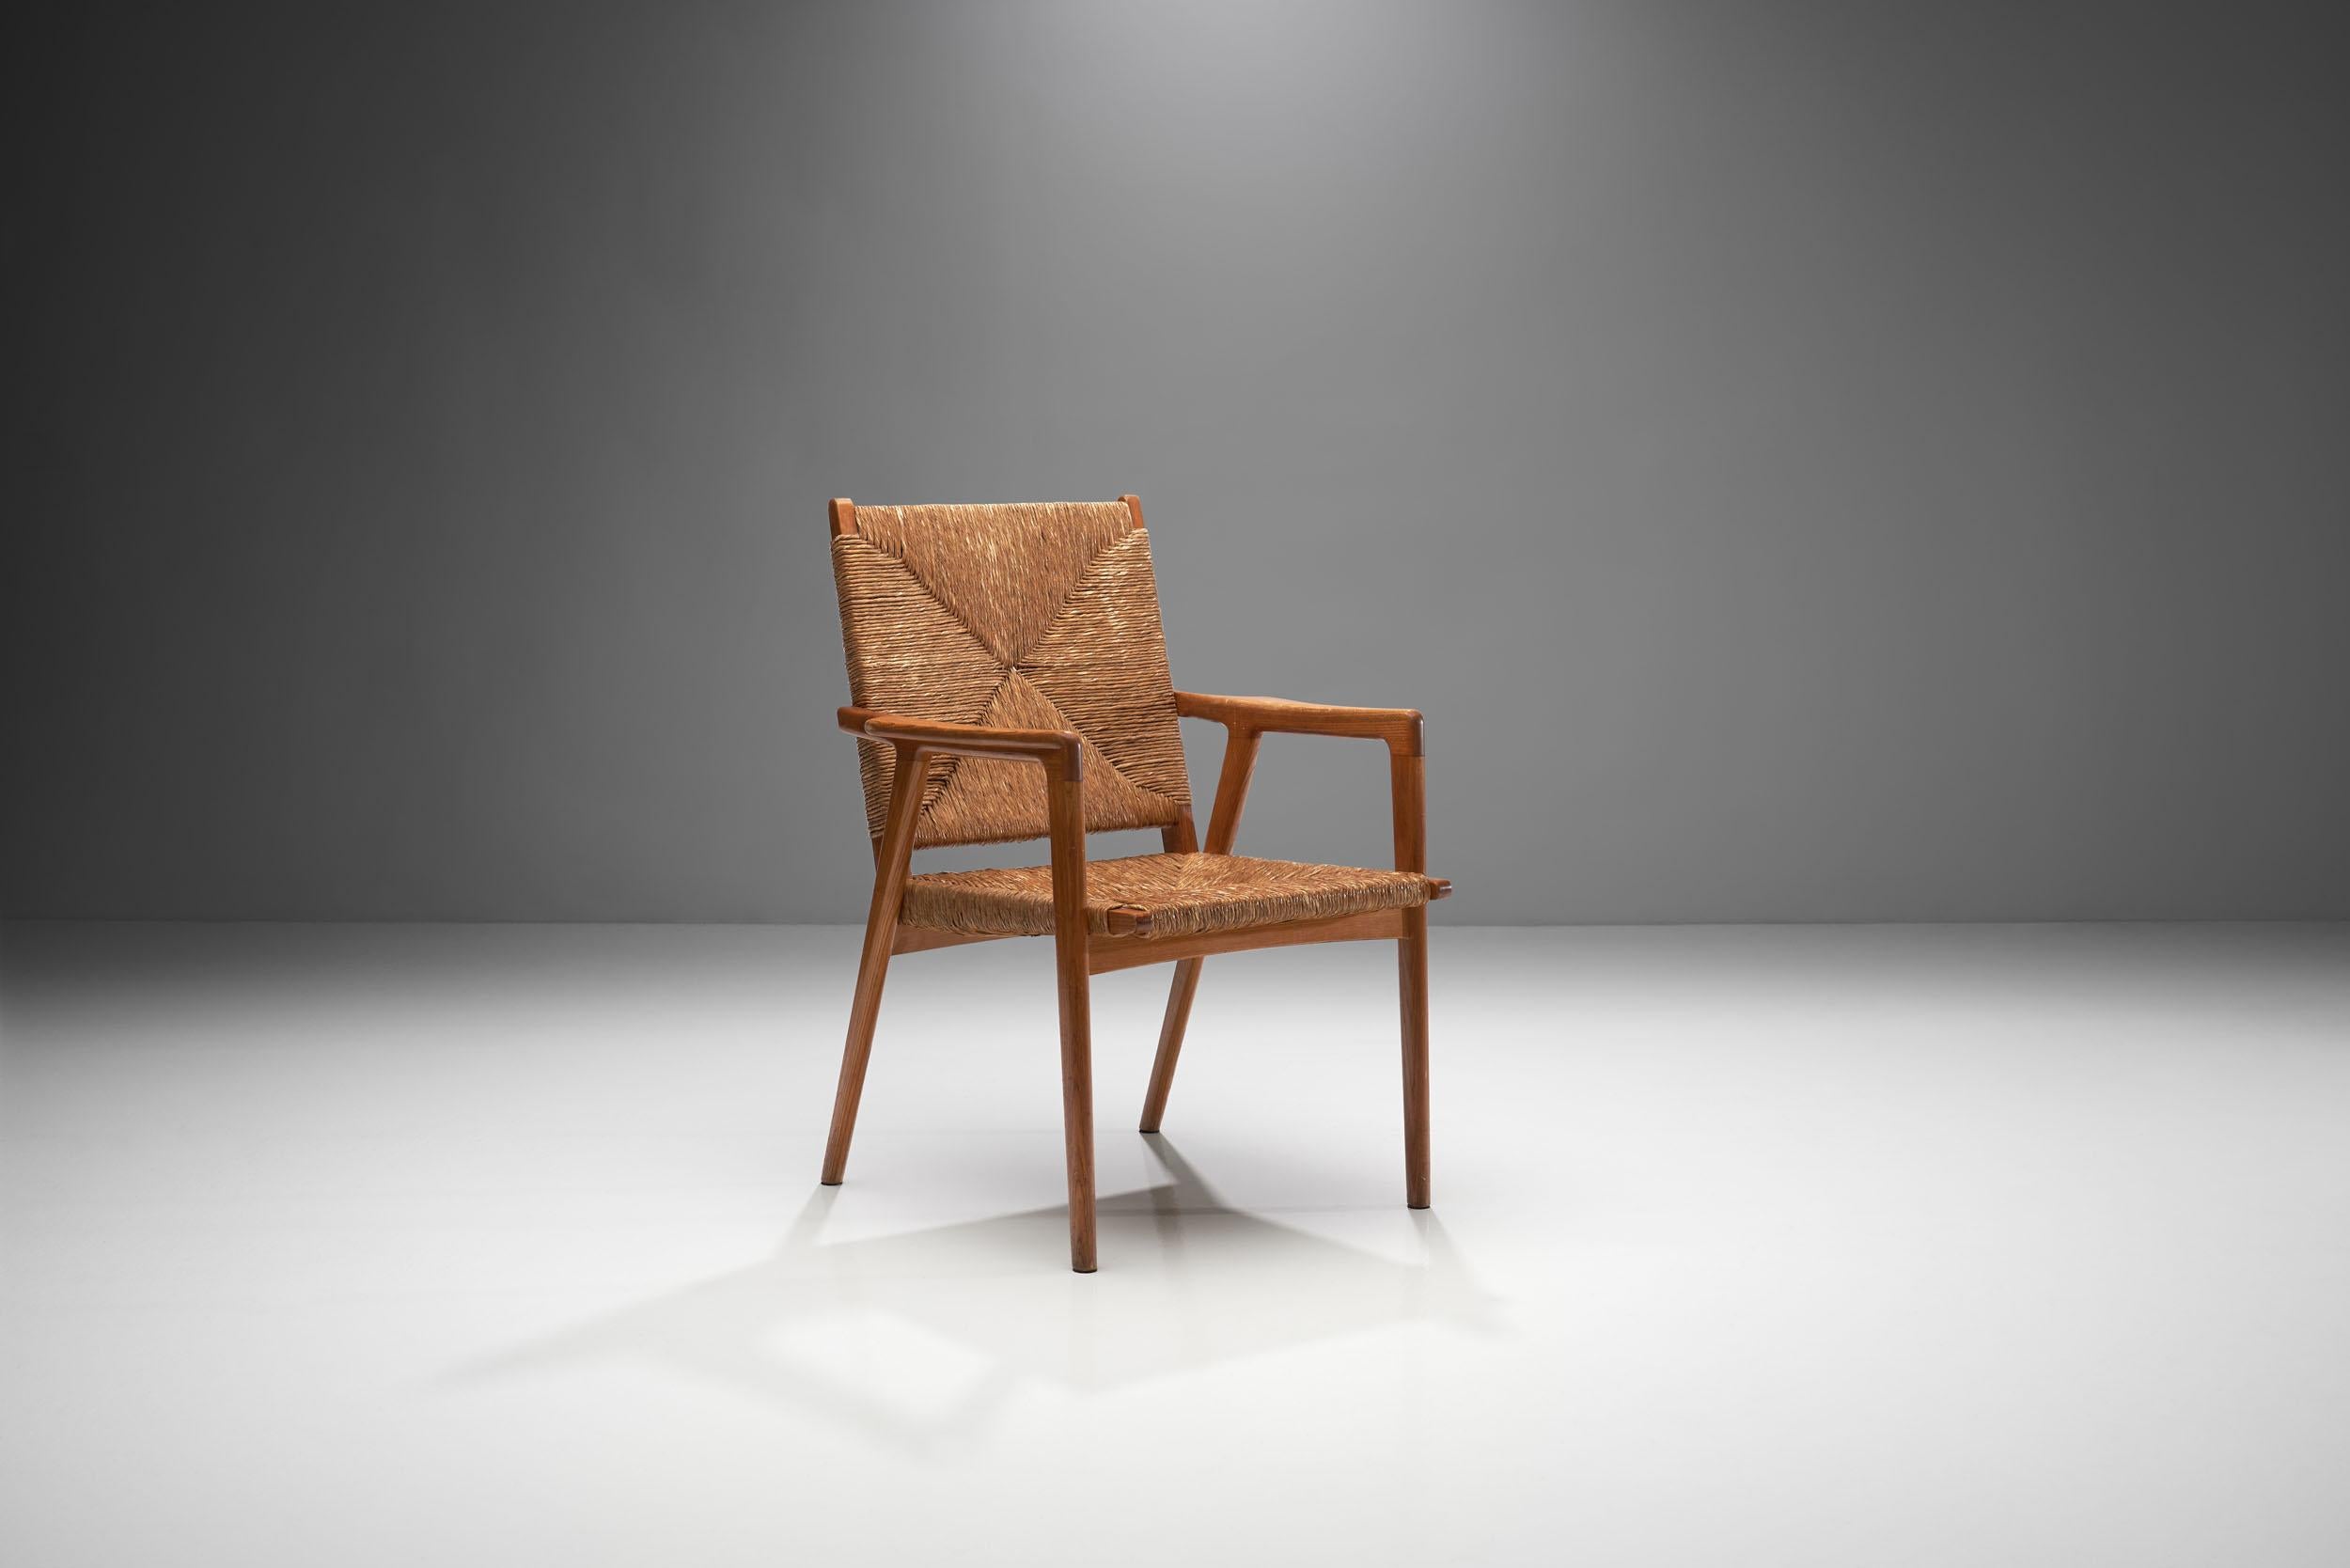 The partnership of two natural materials. The caned seat and backrest of the chair are supported by the solid oak frame. The material is often referred to as ‘cord’, which was often used in Danish furniture of the 1940s-1960s. Danish cord is a